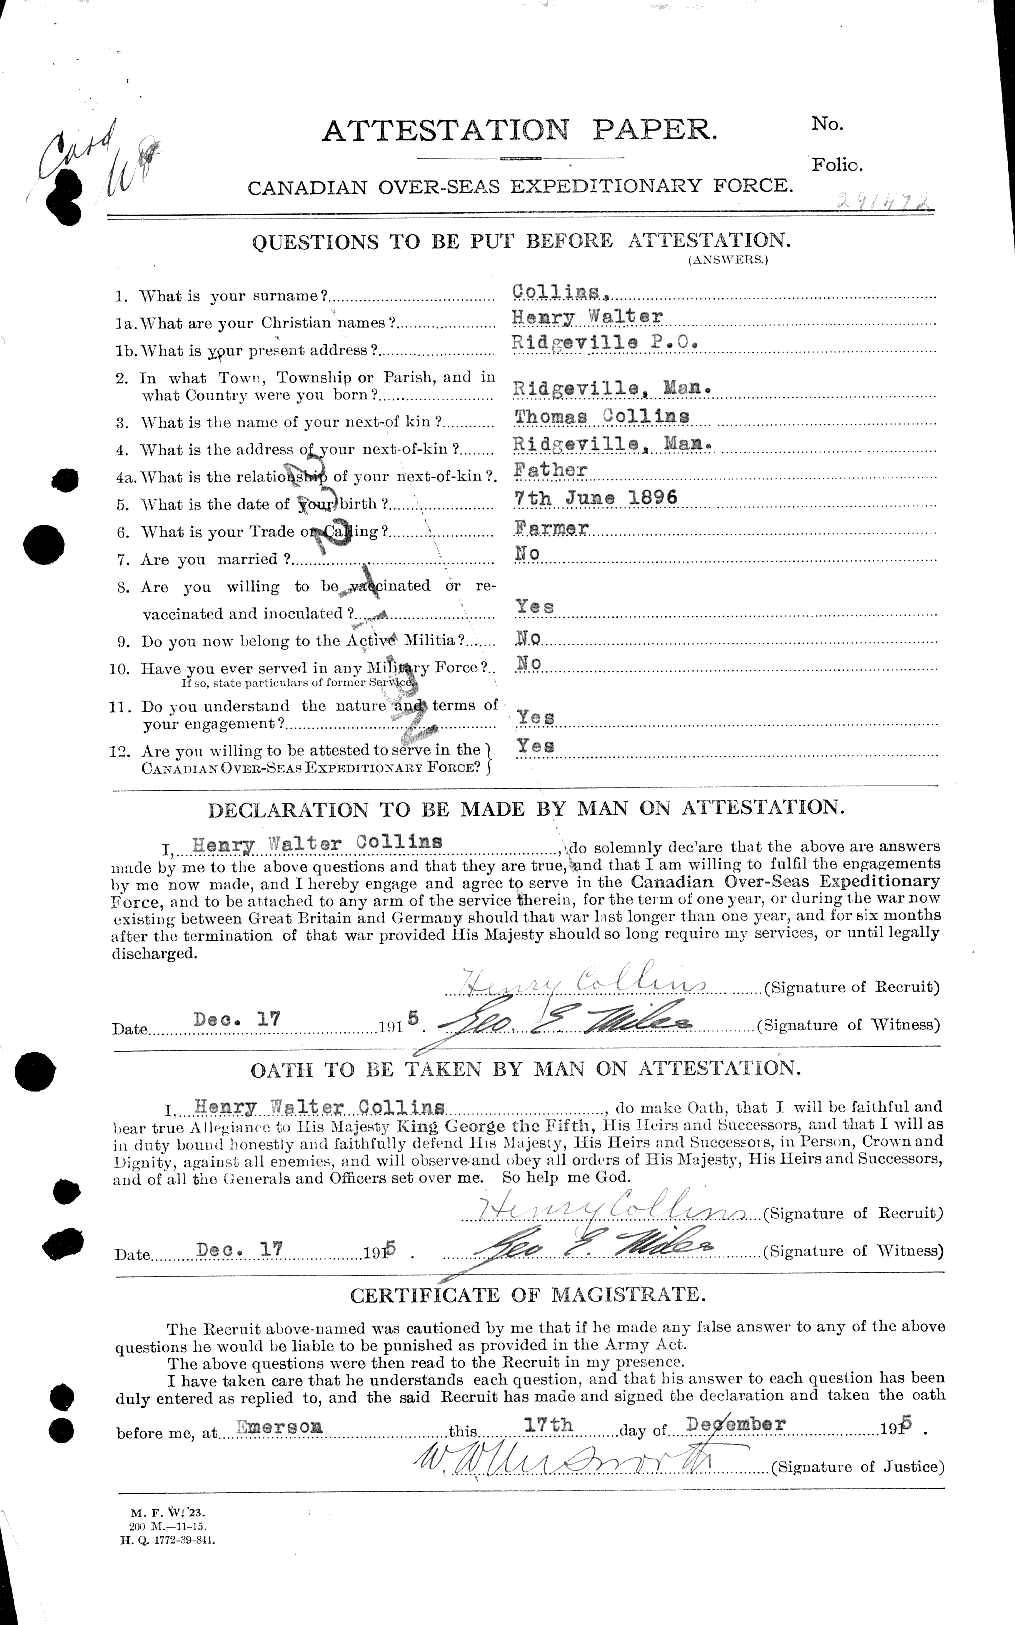 Personnel Records of the First World War - CEF 042298a